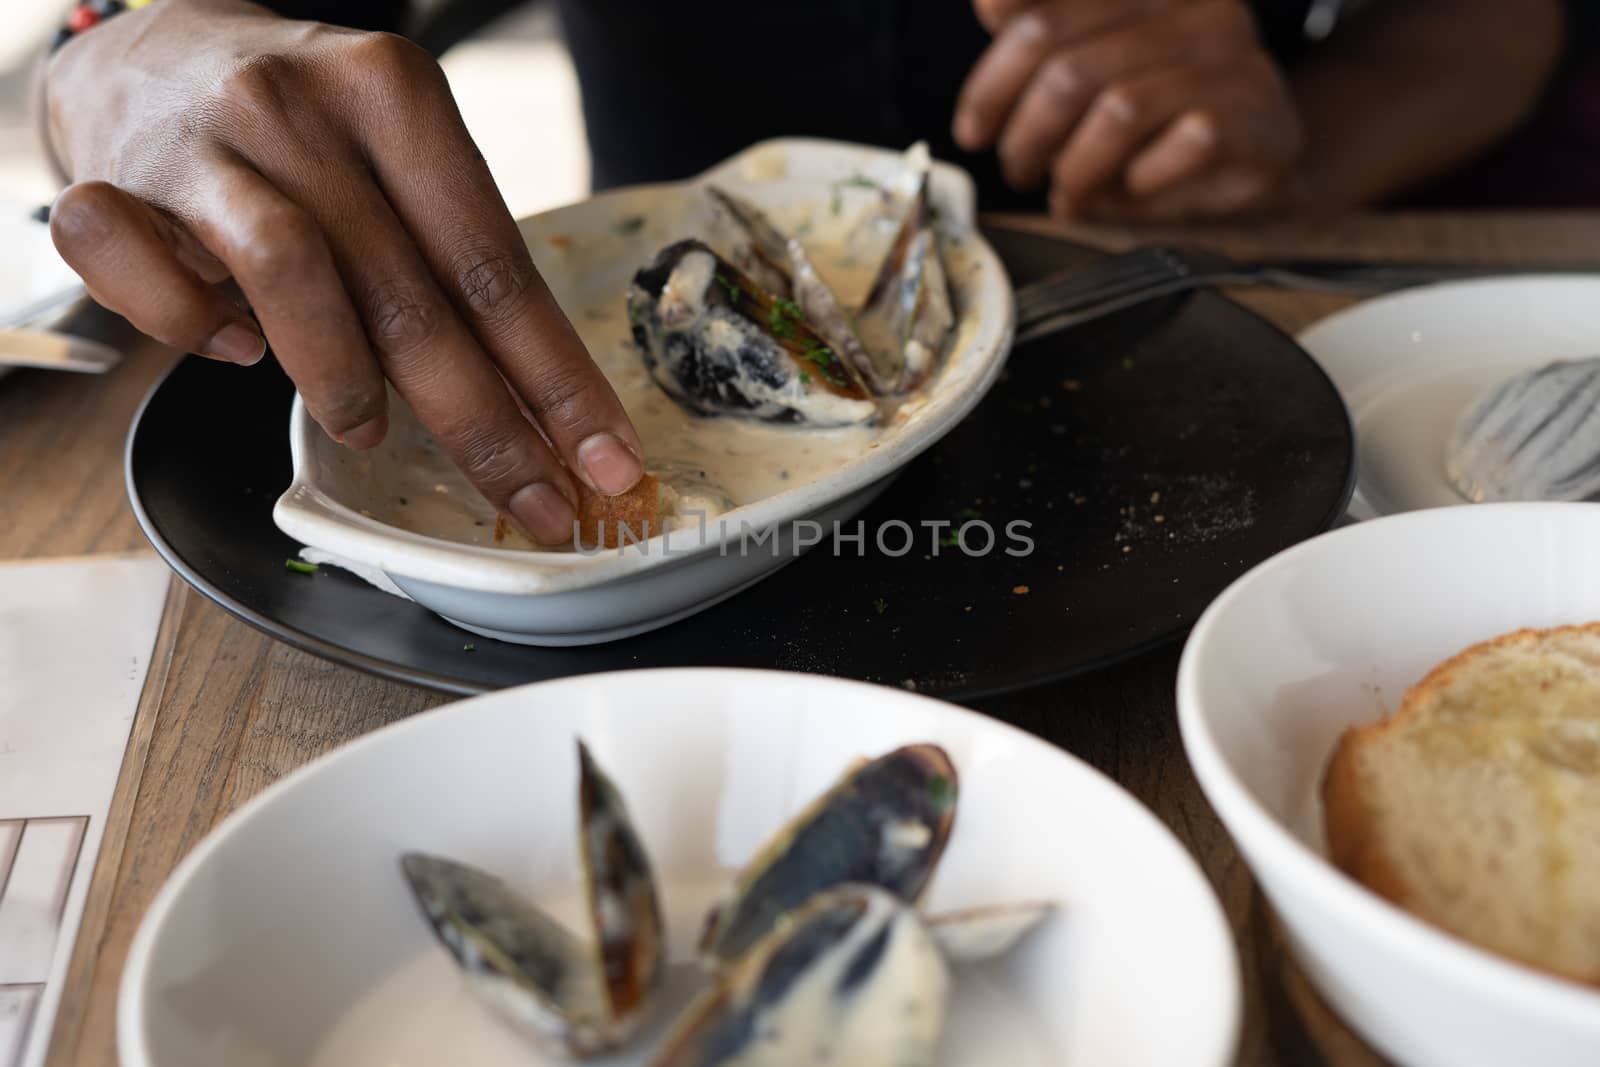 Woman eating mussels out of plate at restaurant by rushay